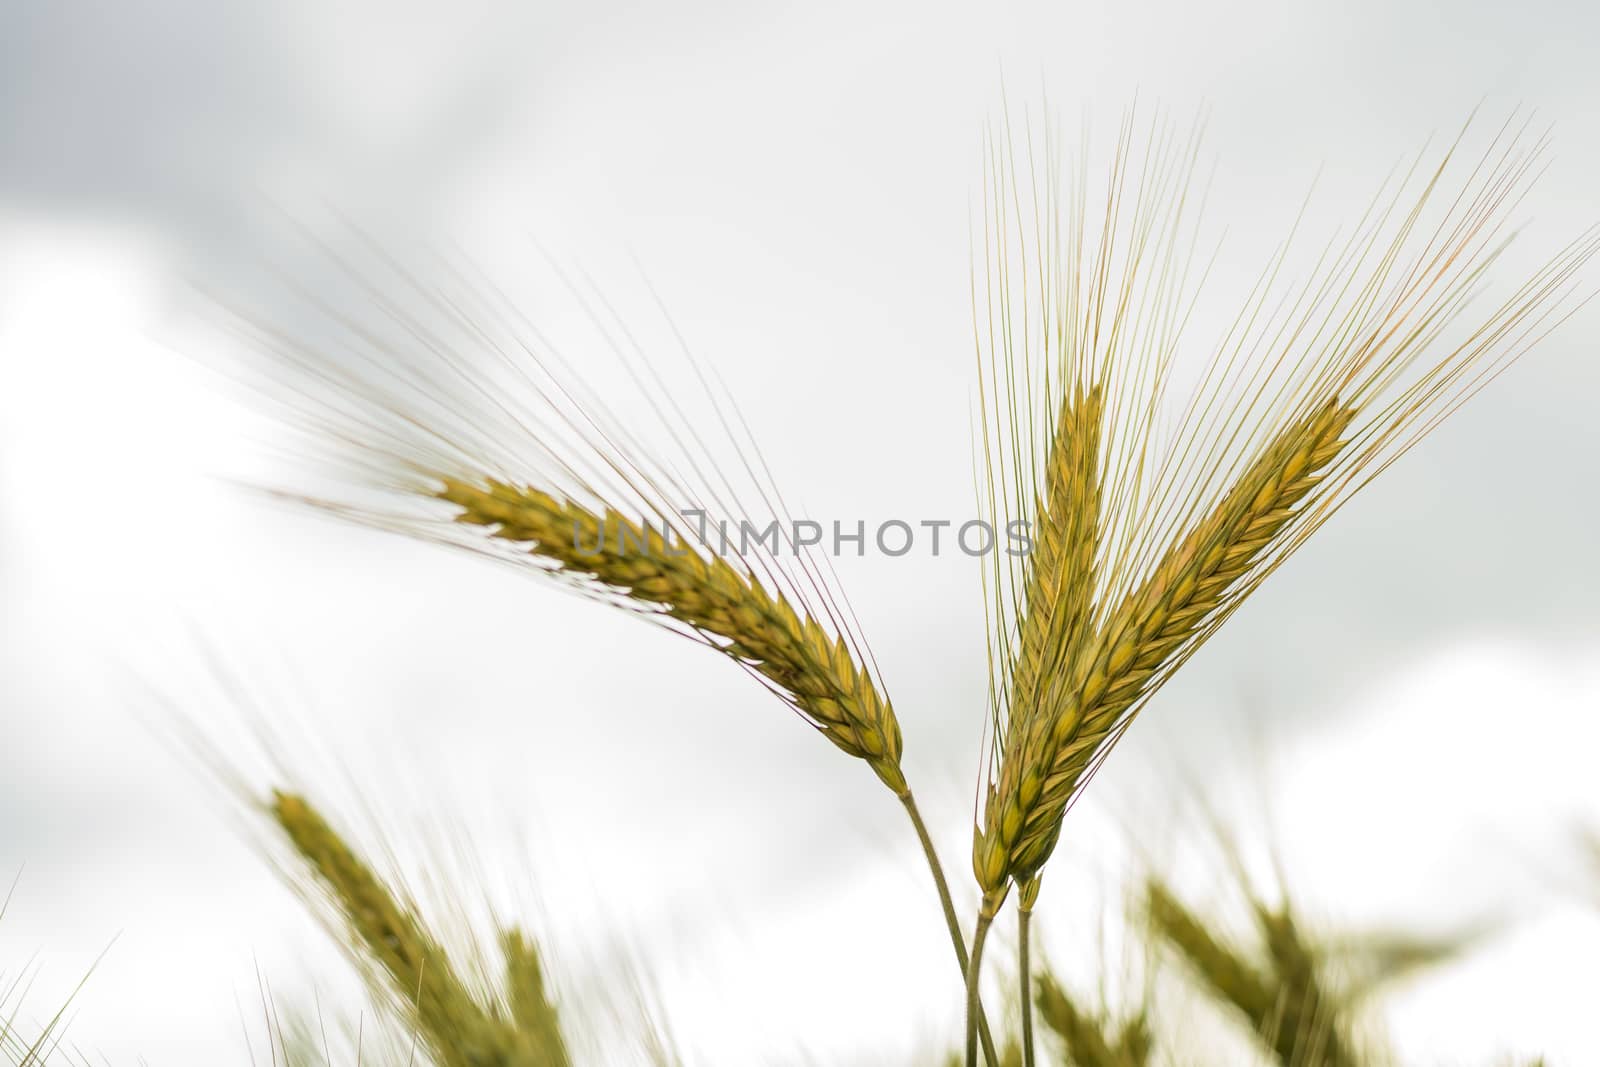 Barley in the field, closeup, selective focus on front stems